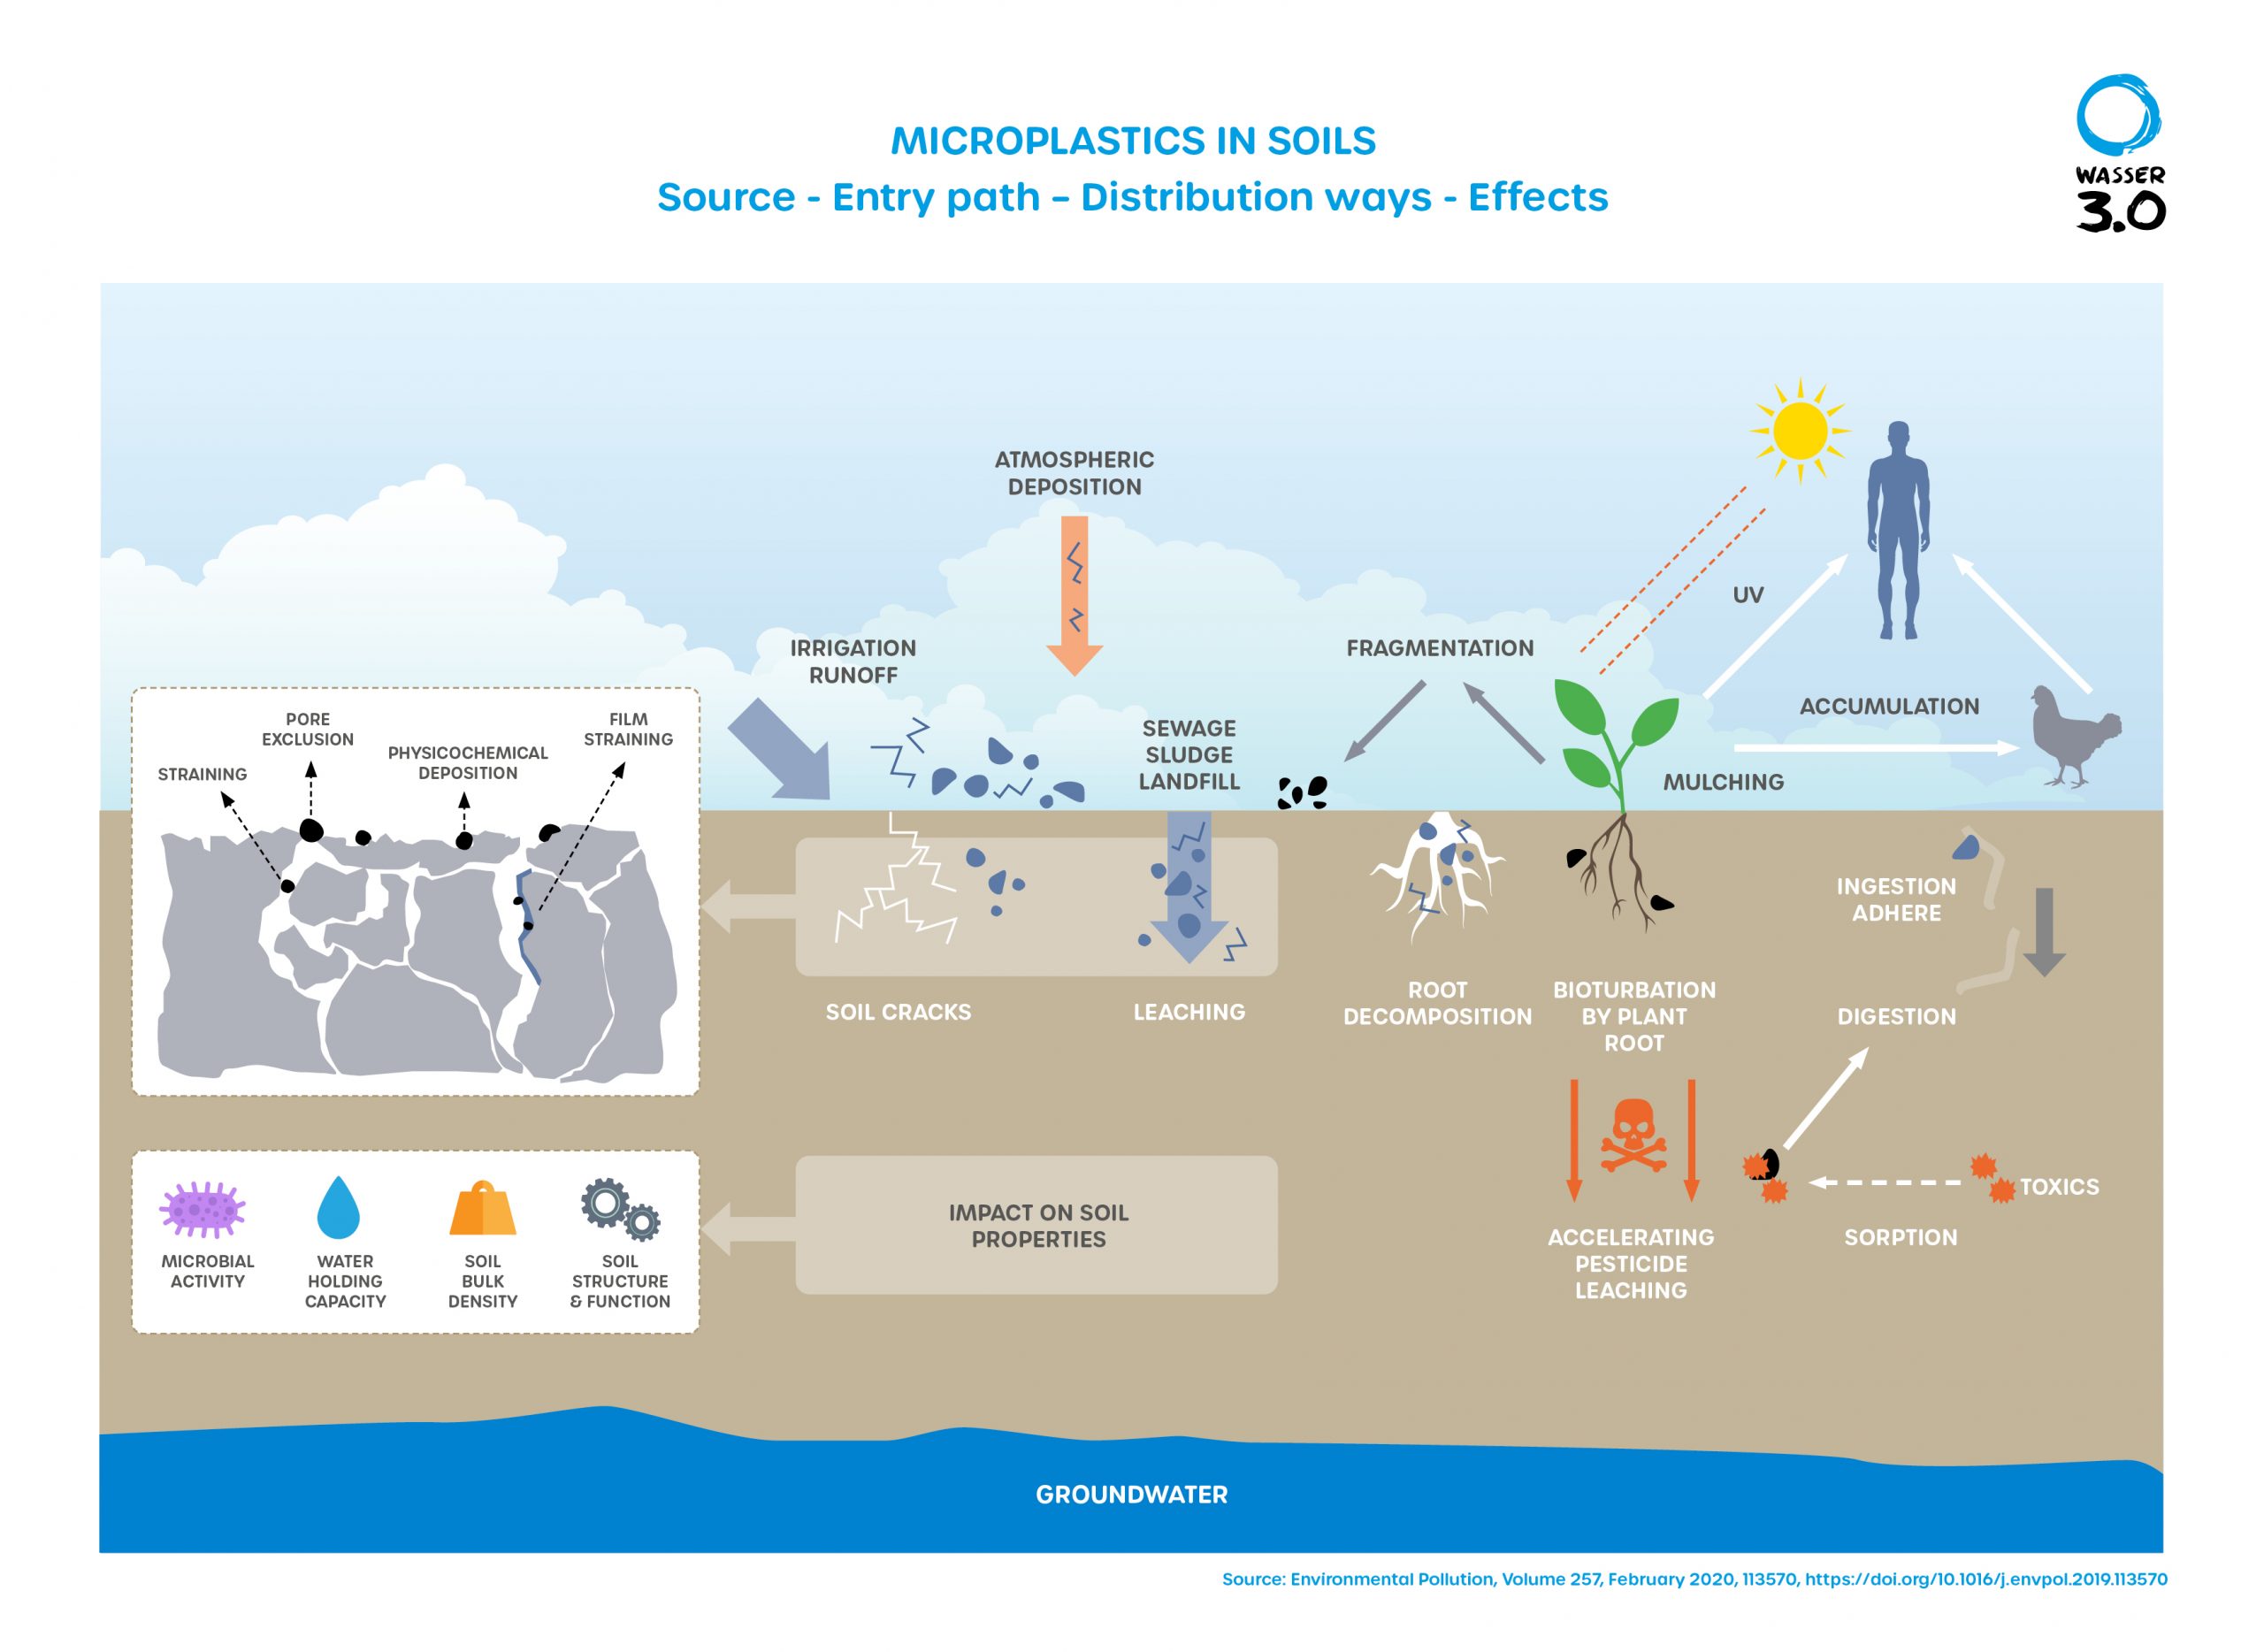 Microplastics in soils - sources, entry paths, distribution routes.